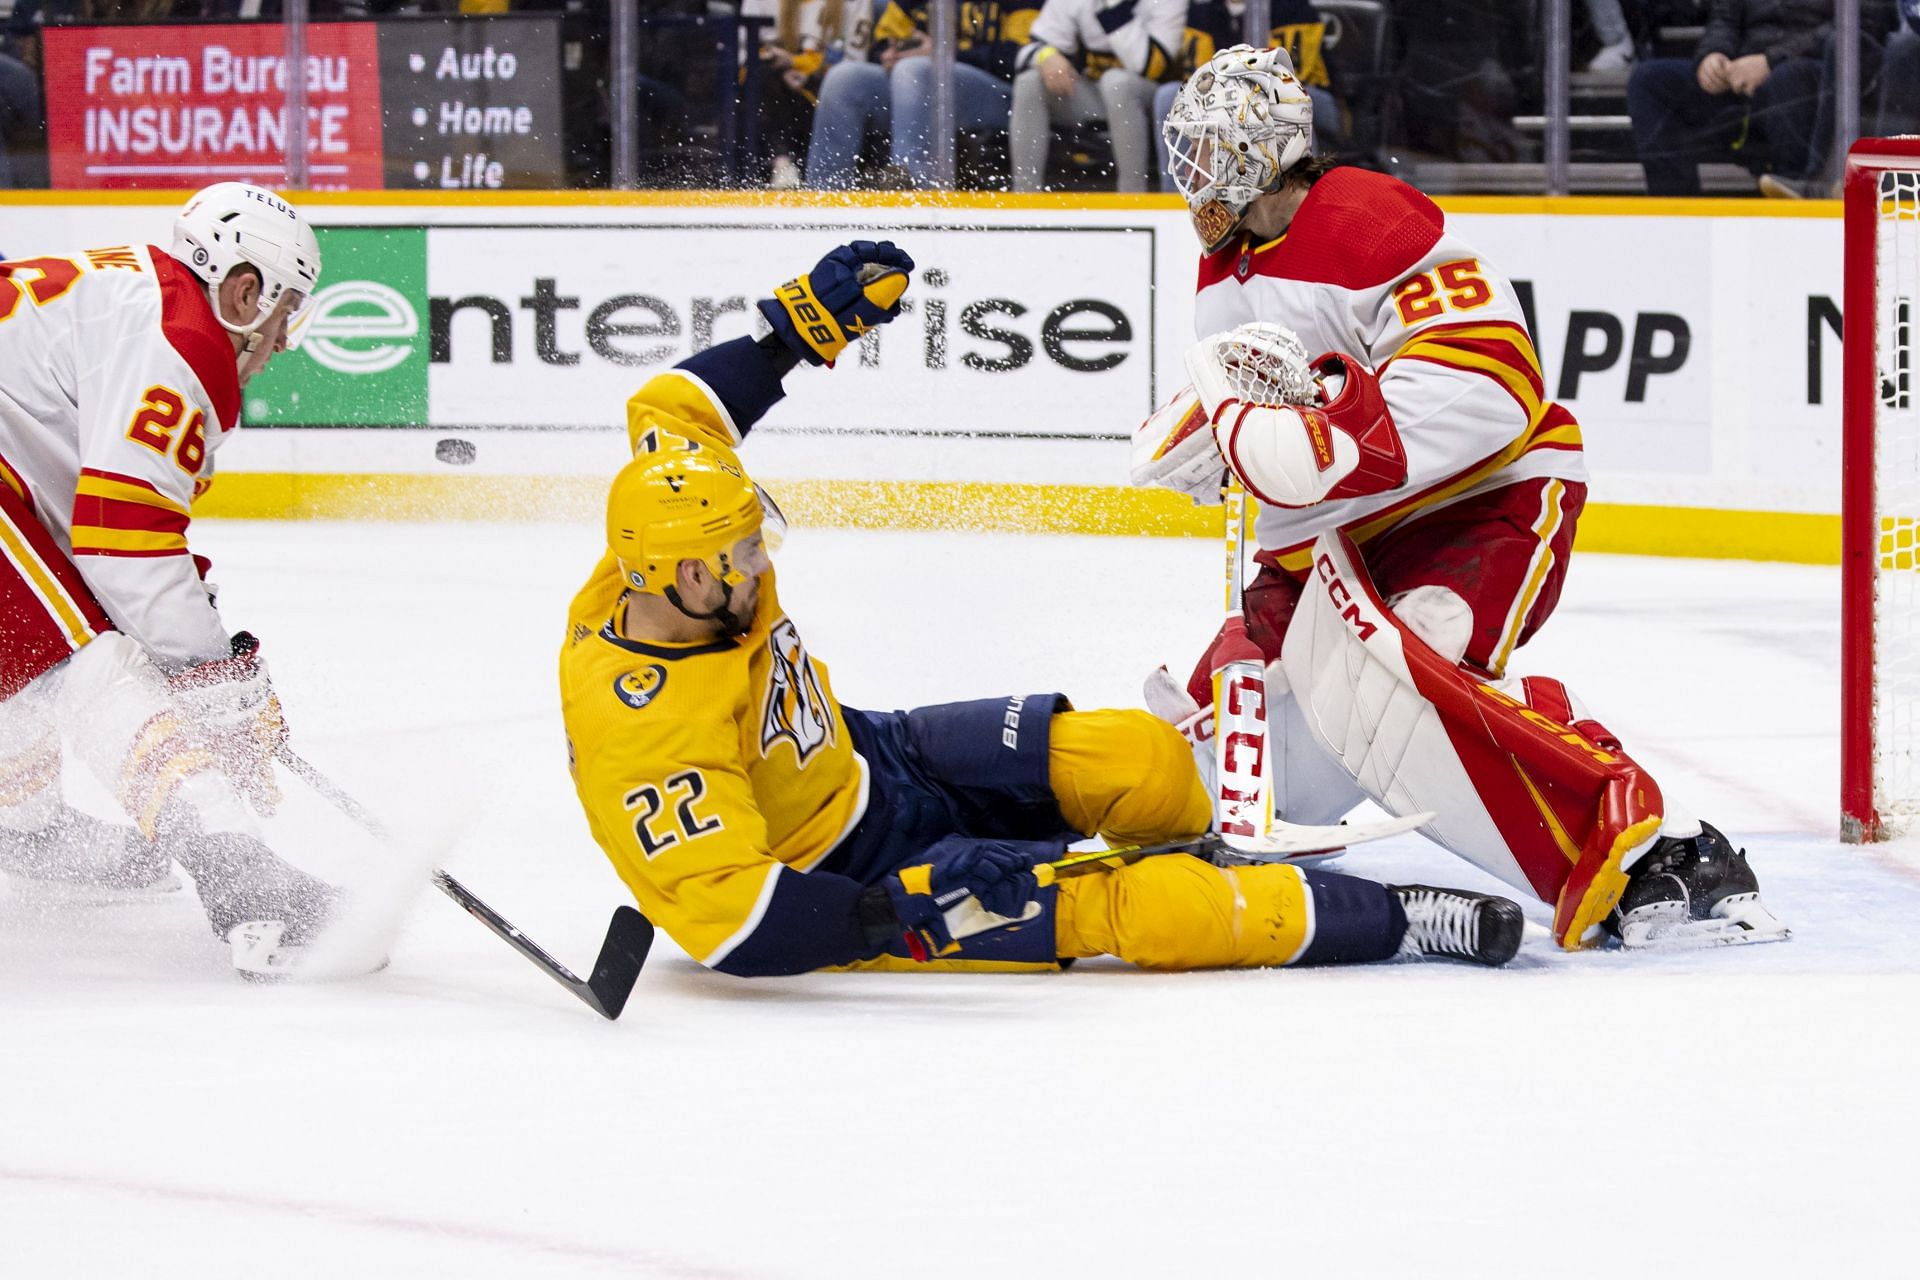 Calgary Flames vs Nashville Predators How and where to watch NHL on TV, live stream, channel list, and more